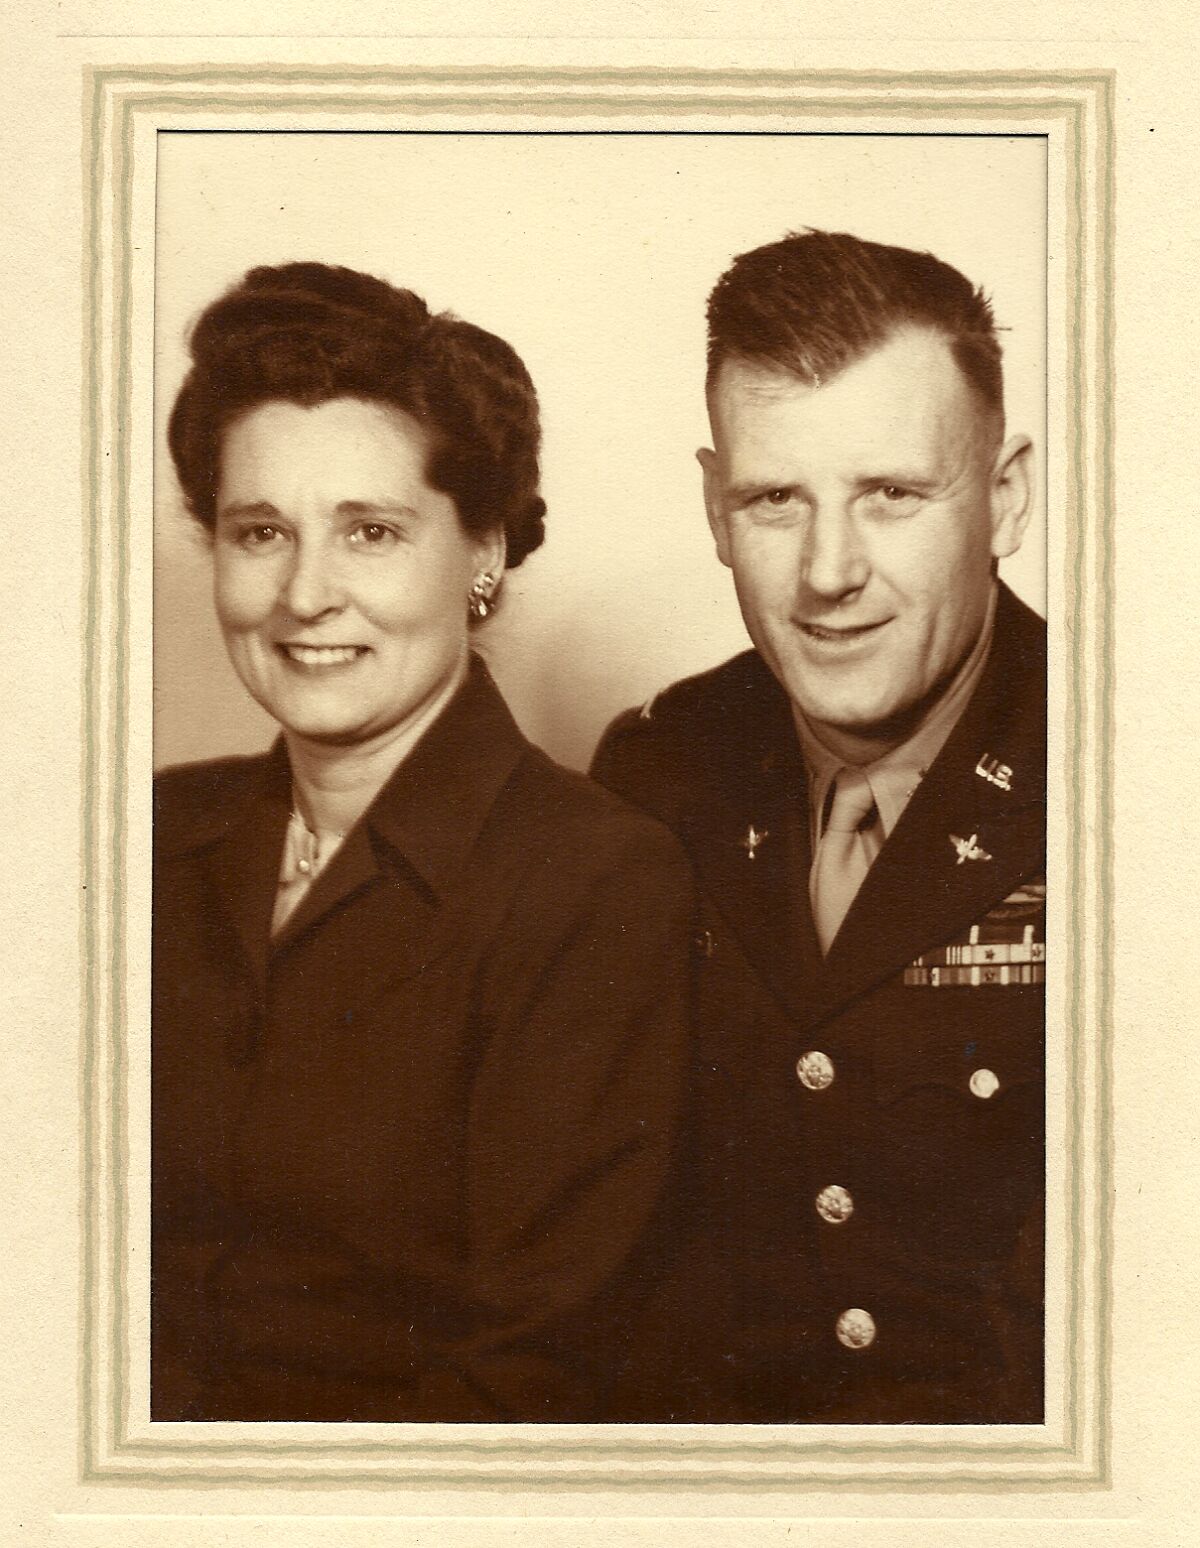 Portrait of Florence and Bill Montgomery.